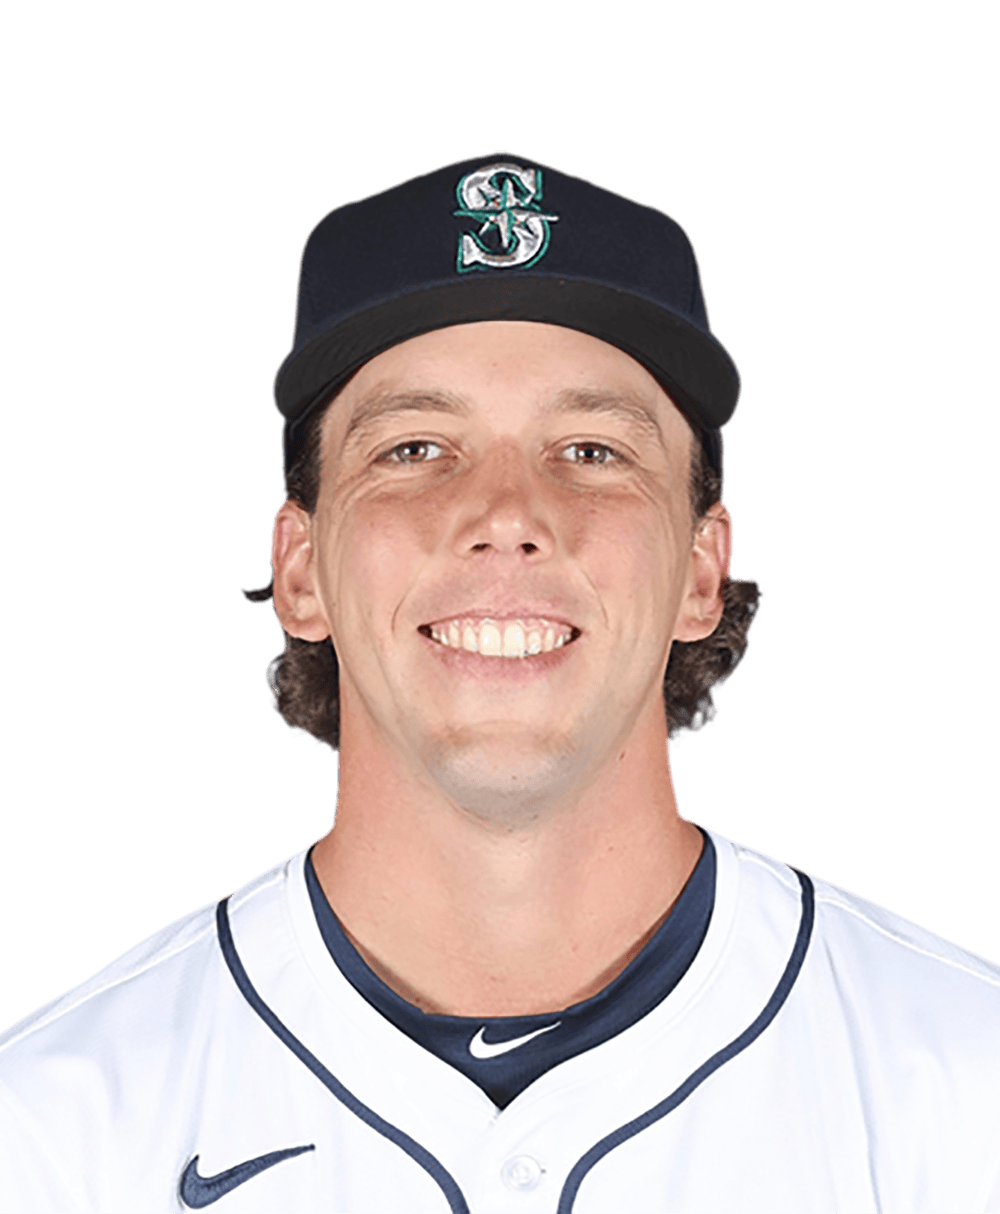 BREAKING: Logan Gilbert to be called up by the Mariners alongside